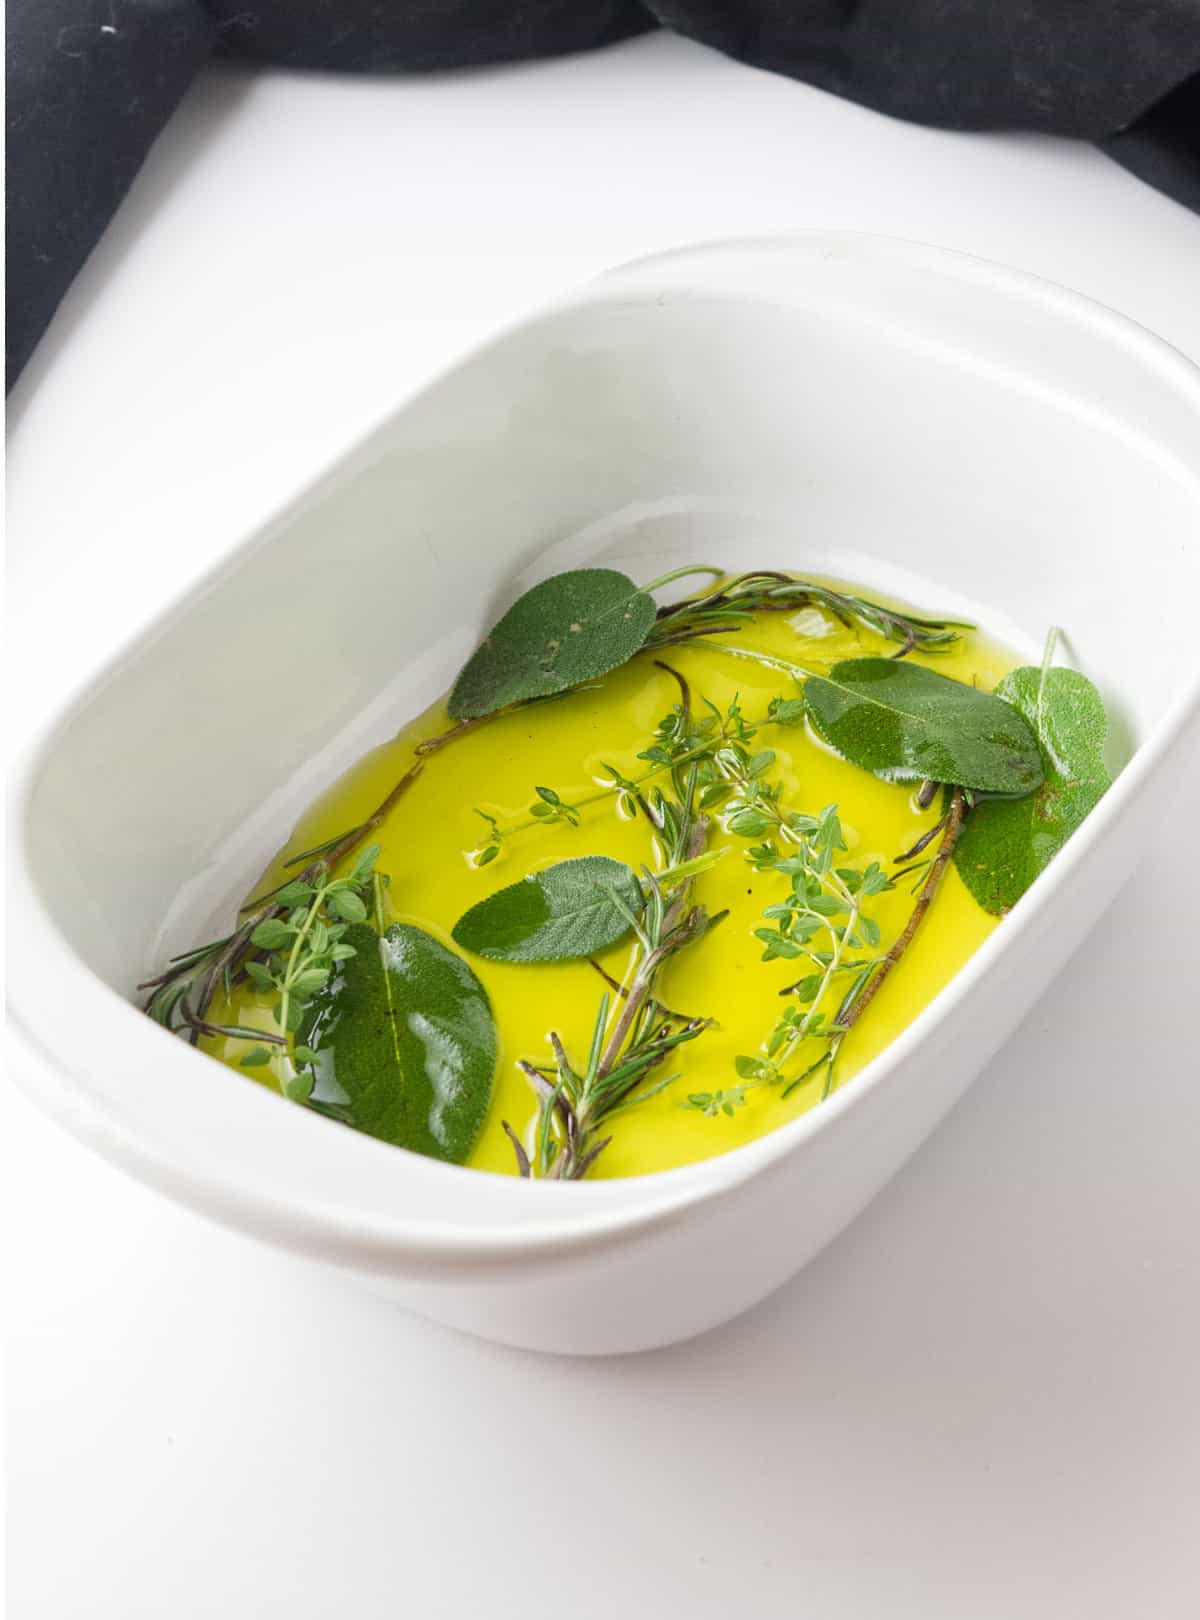 herbs infused in olive oil in a baker.